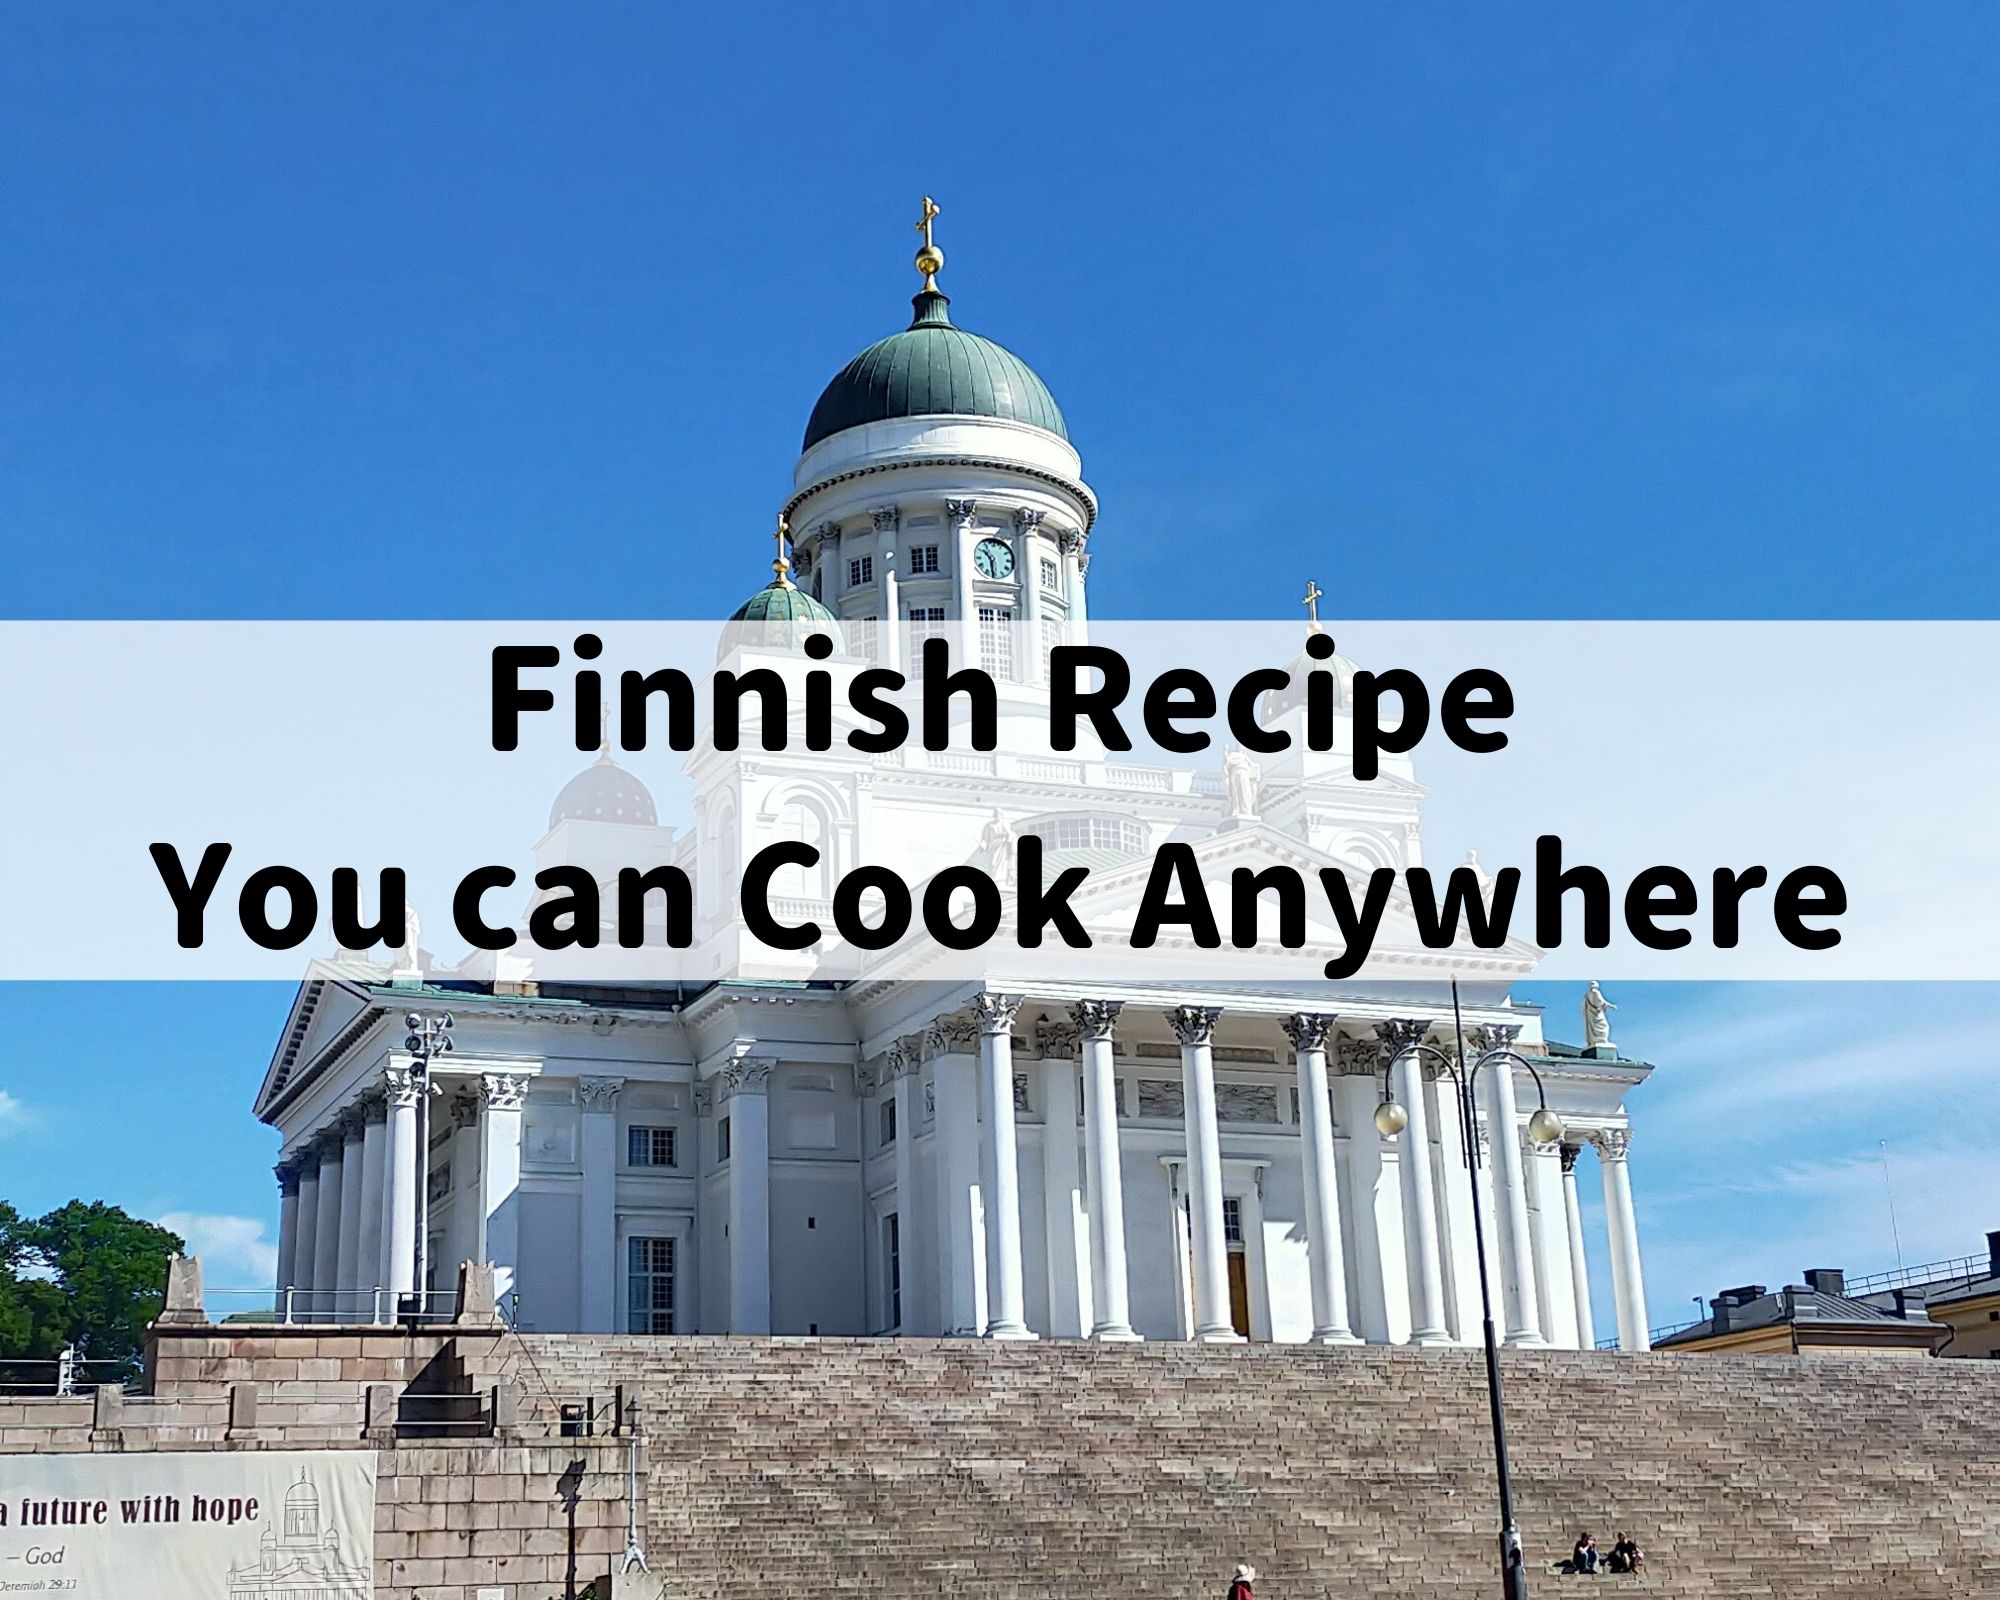 Finnish Food for Everywhere